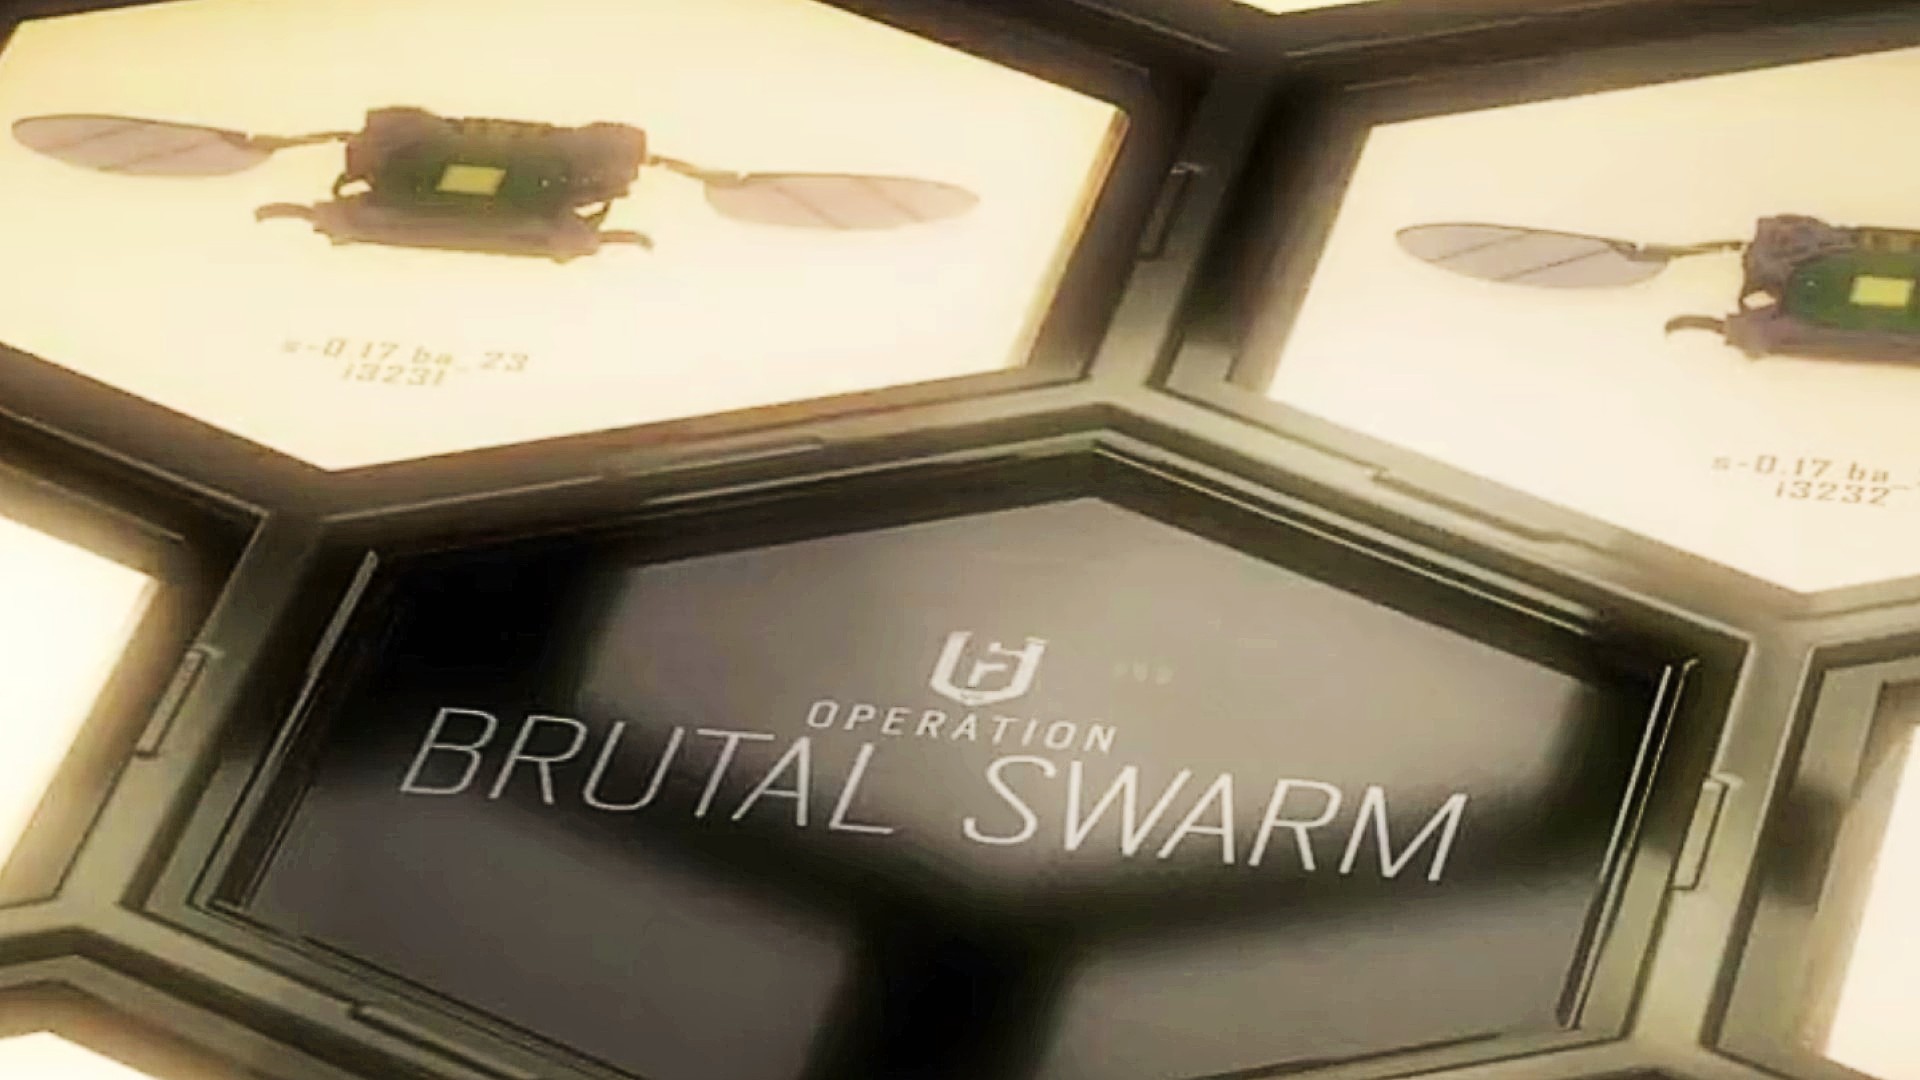 Rainbow Six Siege Operation Brutal Swarm’s reveal is coming soon